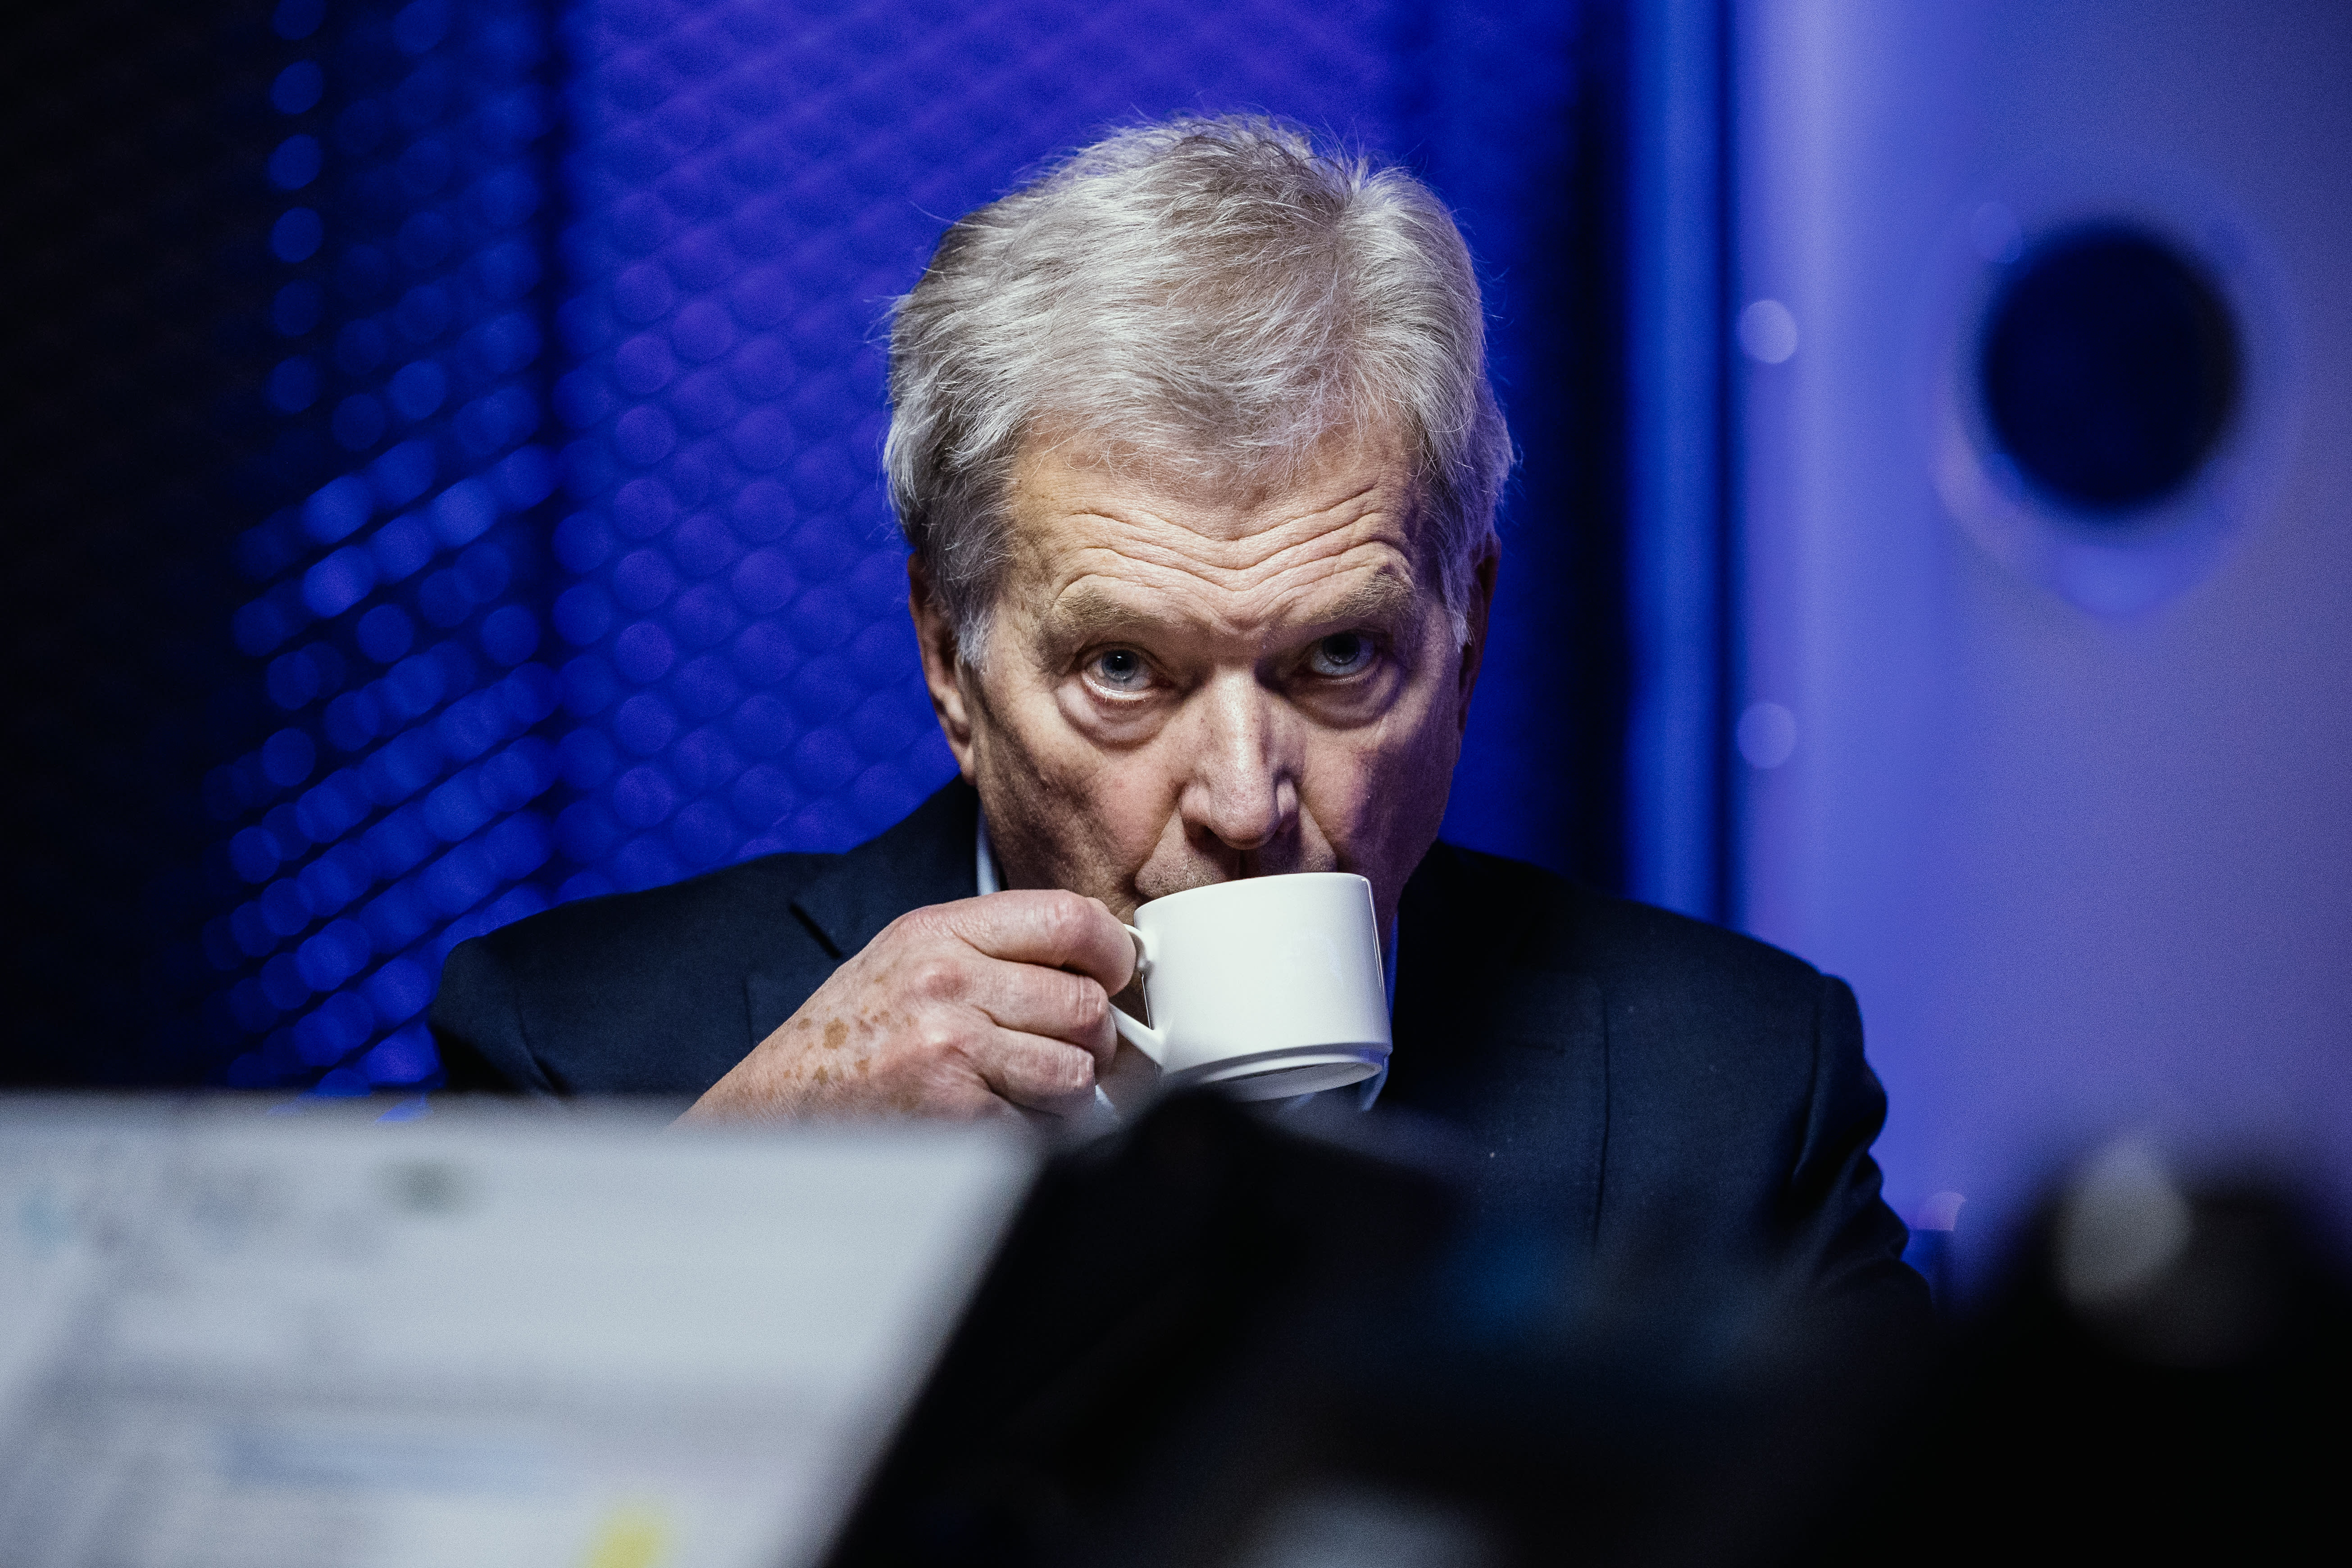 Niinistö: There is no point in discussing with Putin now